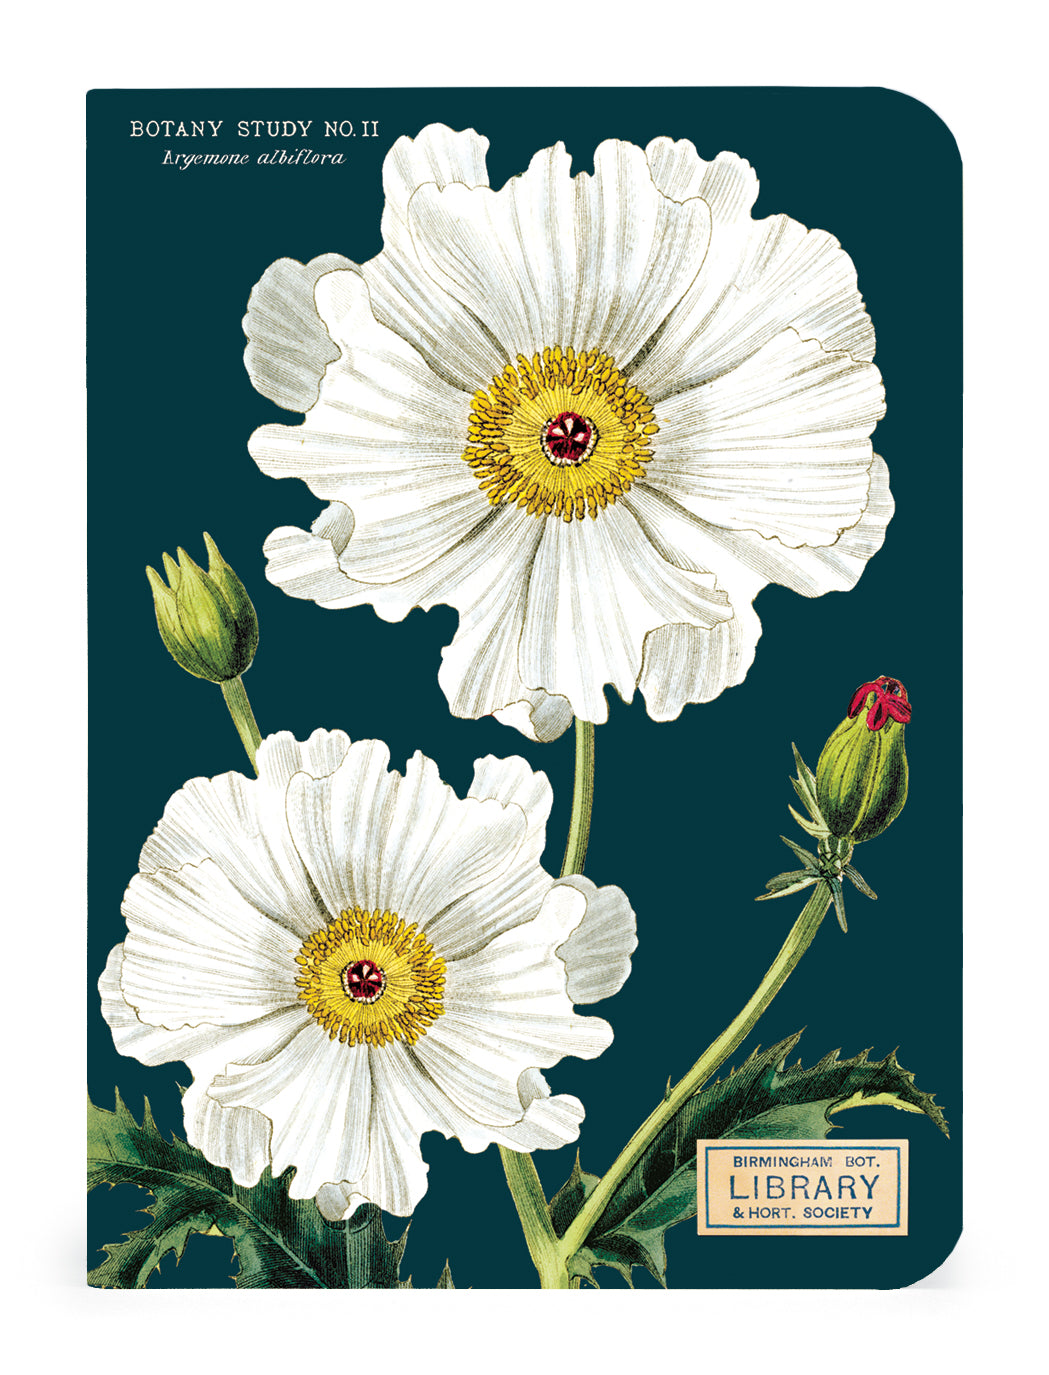 Three Botany 3 Mini Notebooks with vintage artwork of flowers on them by Cavallini Papers &amp; Co.